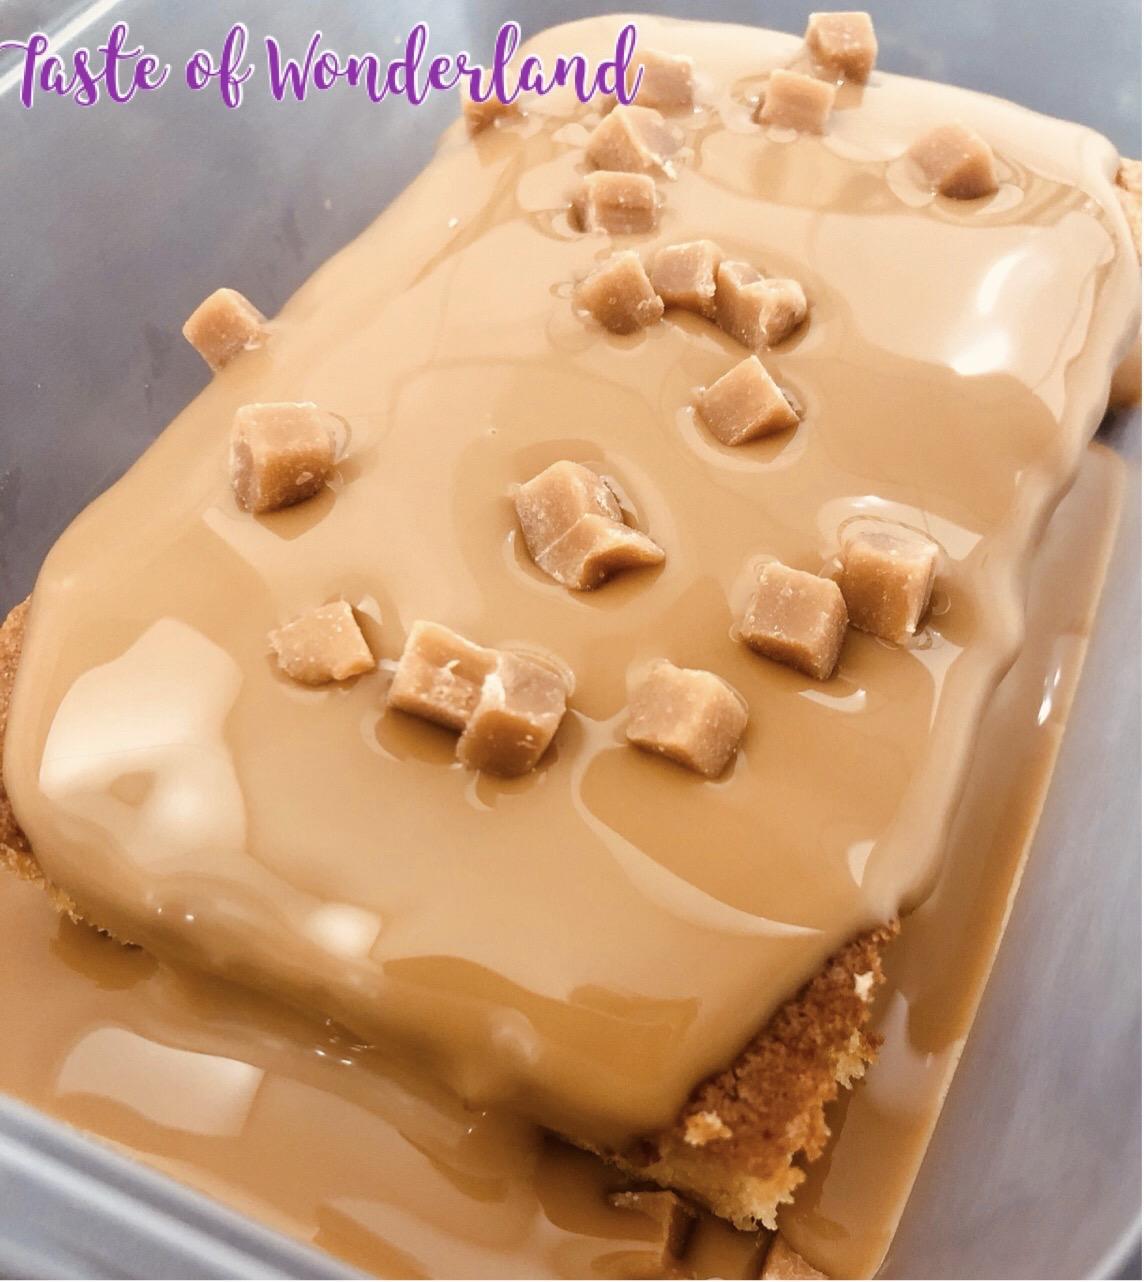 Toffee Sponge With Toffee Sauce